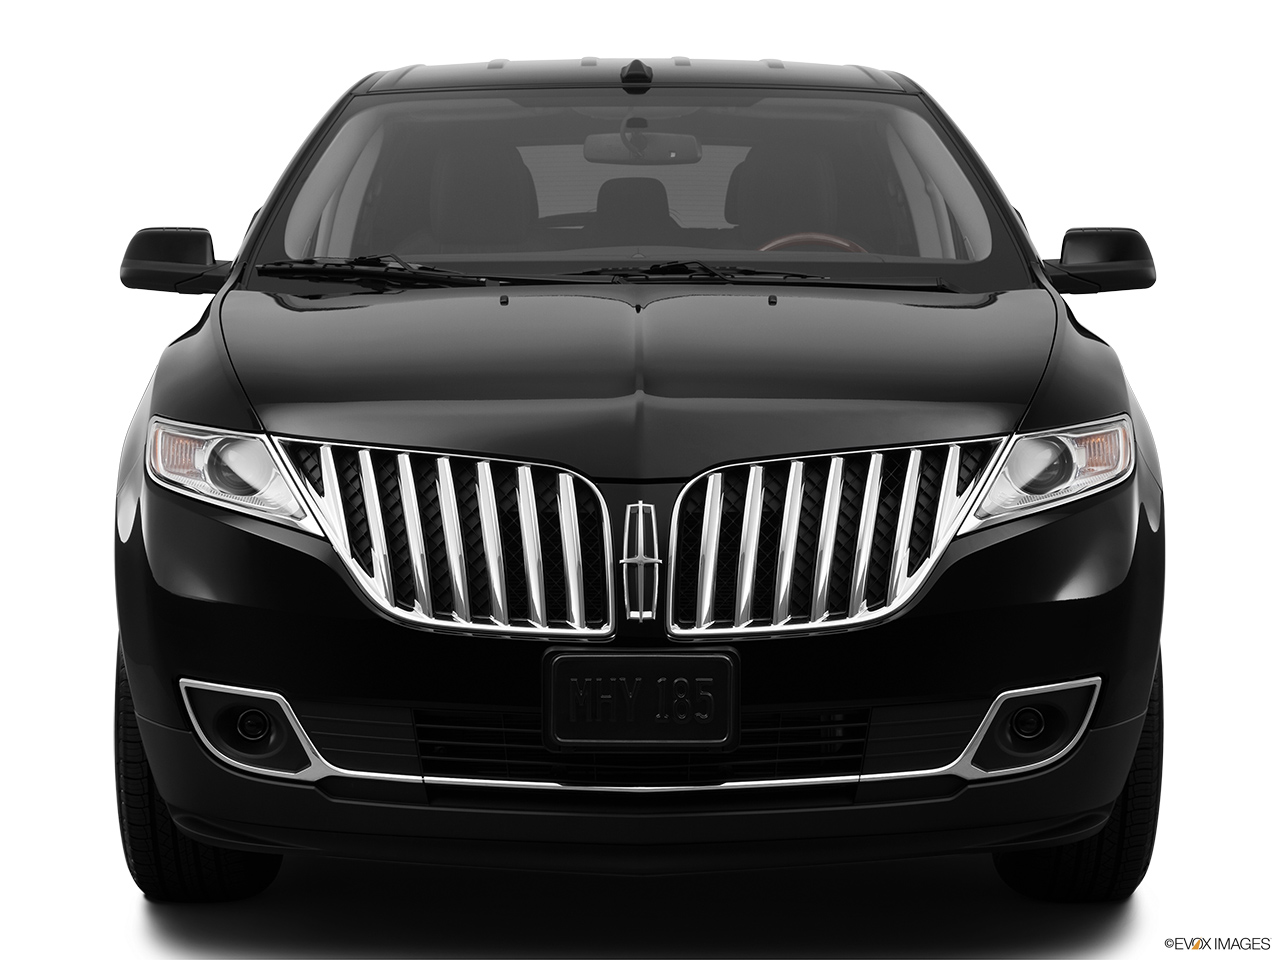 2012 Lincoln MKX FWD Low/wide front. 